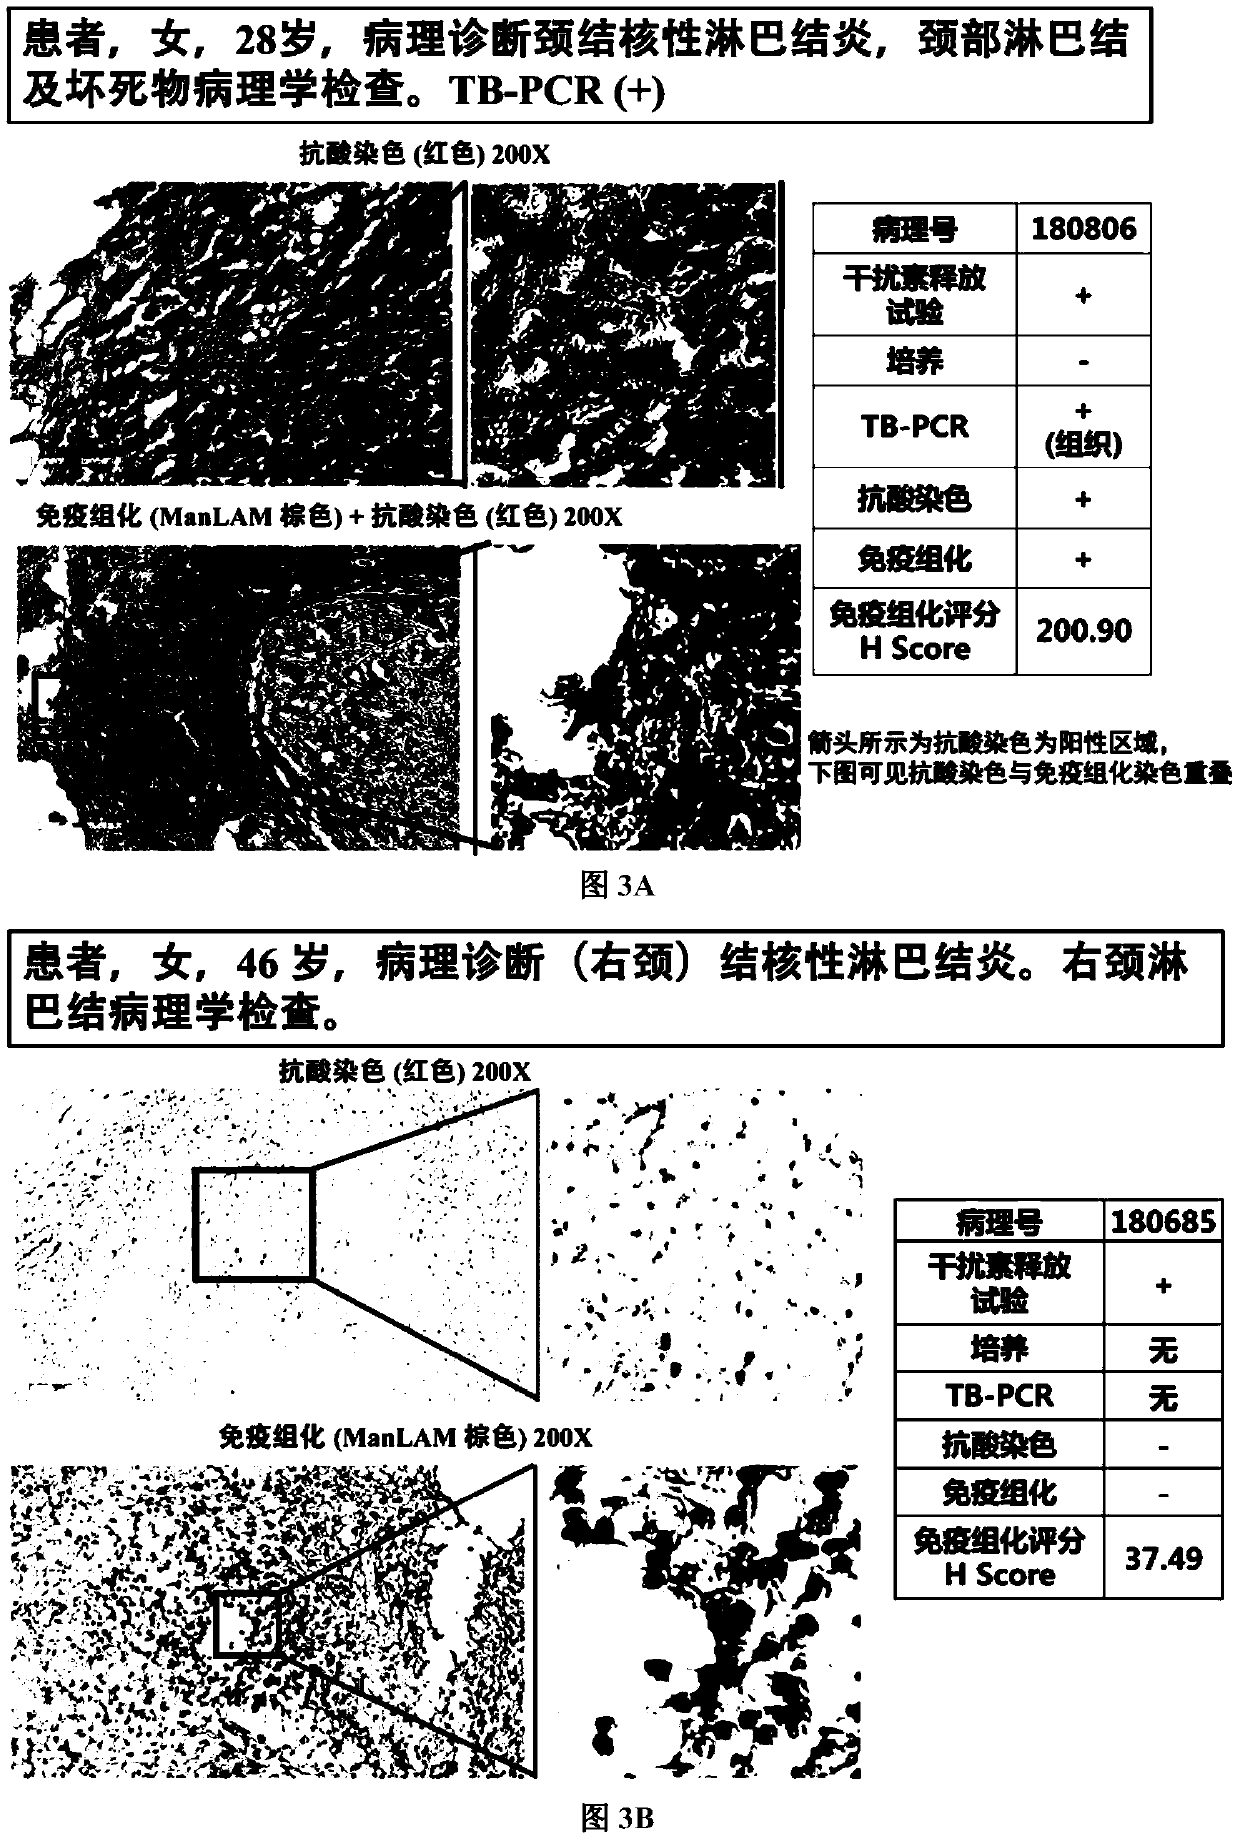 Application of tuberculosis immunohistochemical kit in diagnosis of tuberculosis pathological tissues